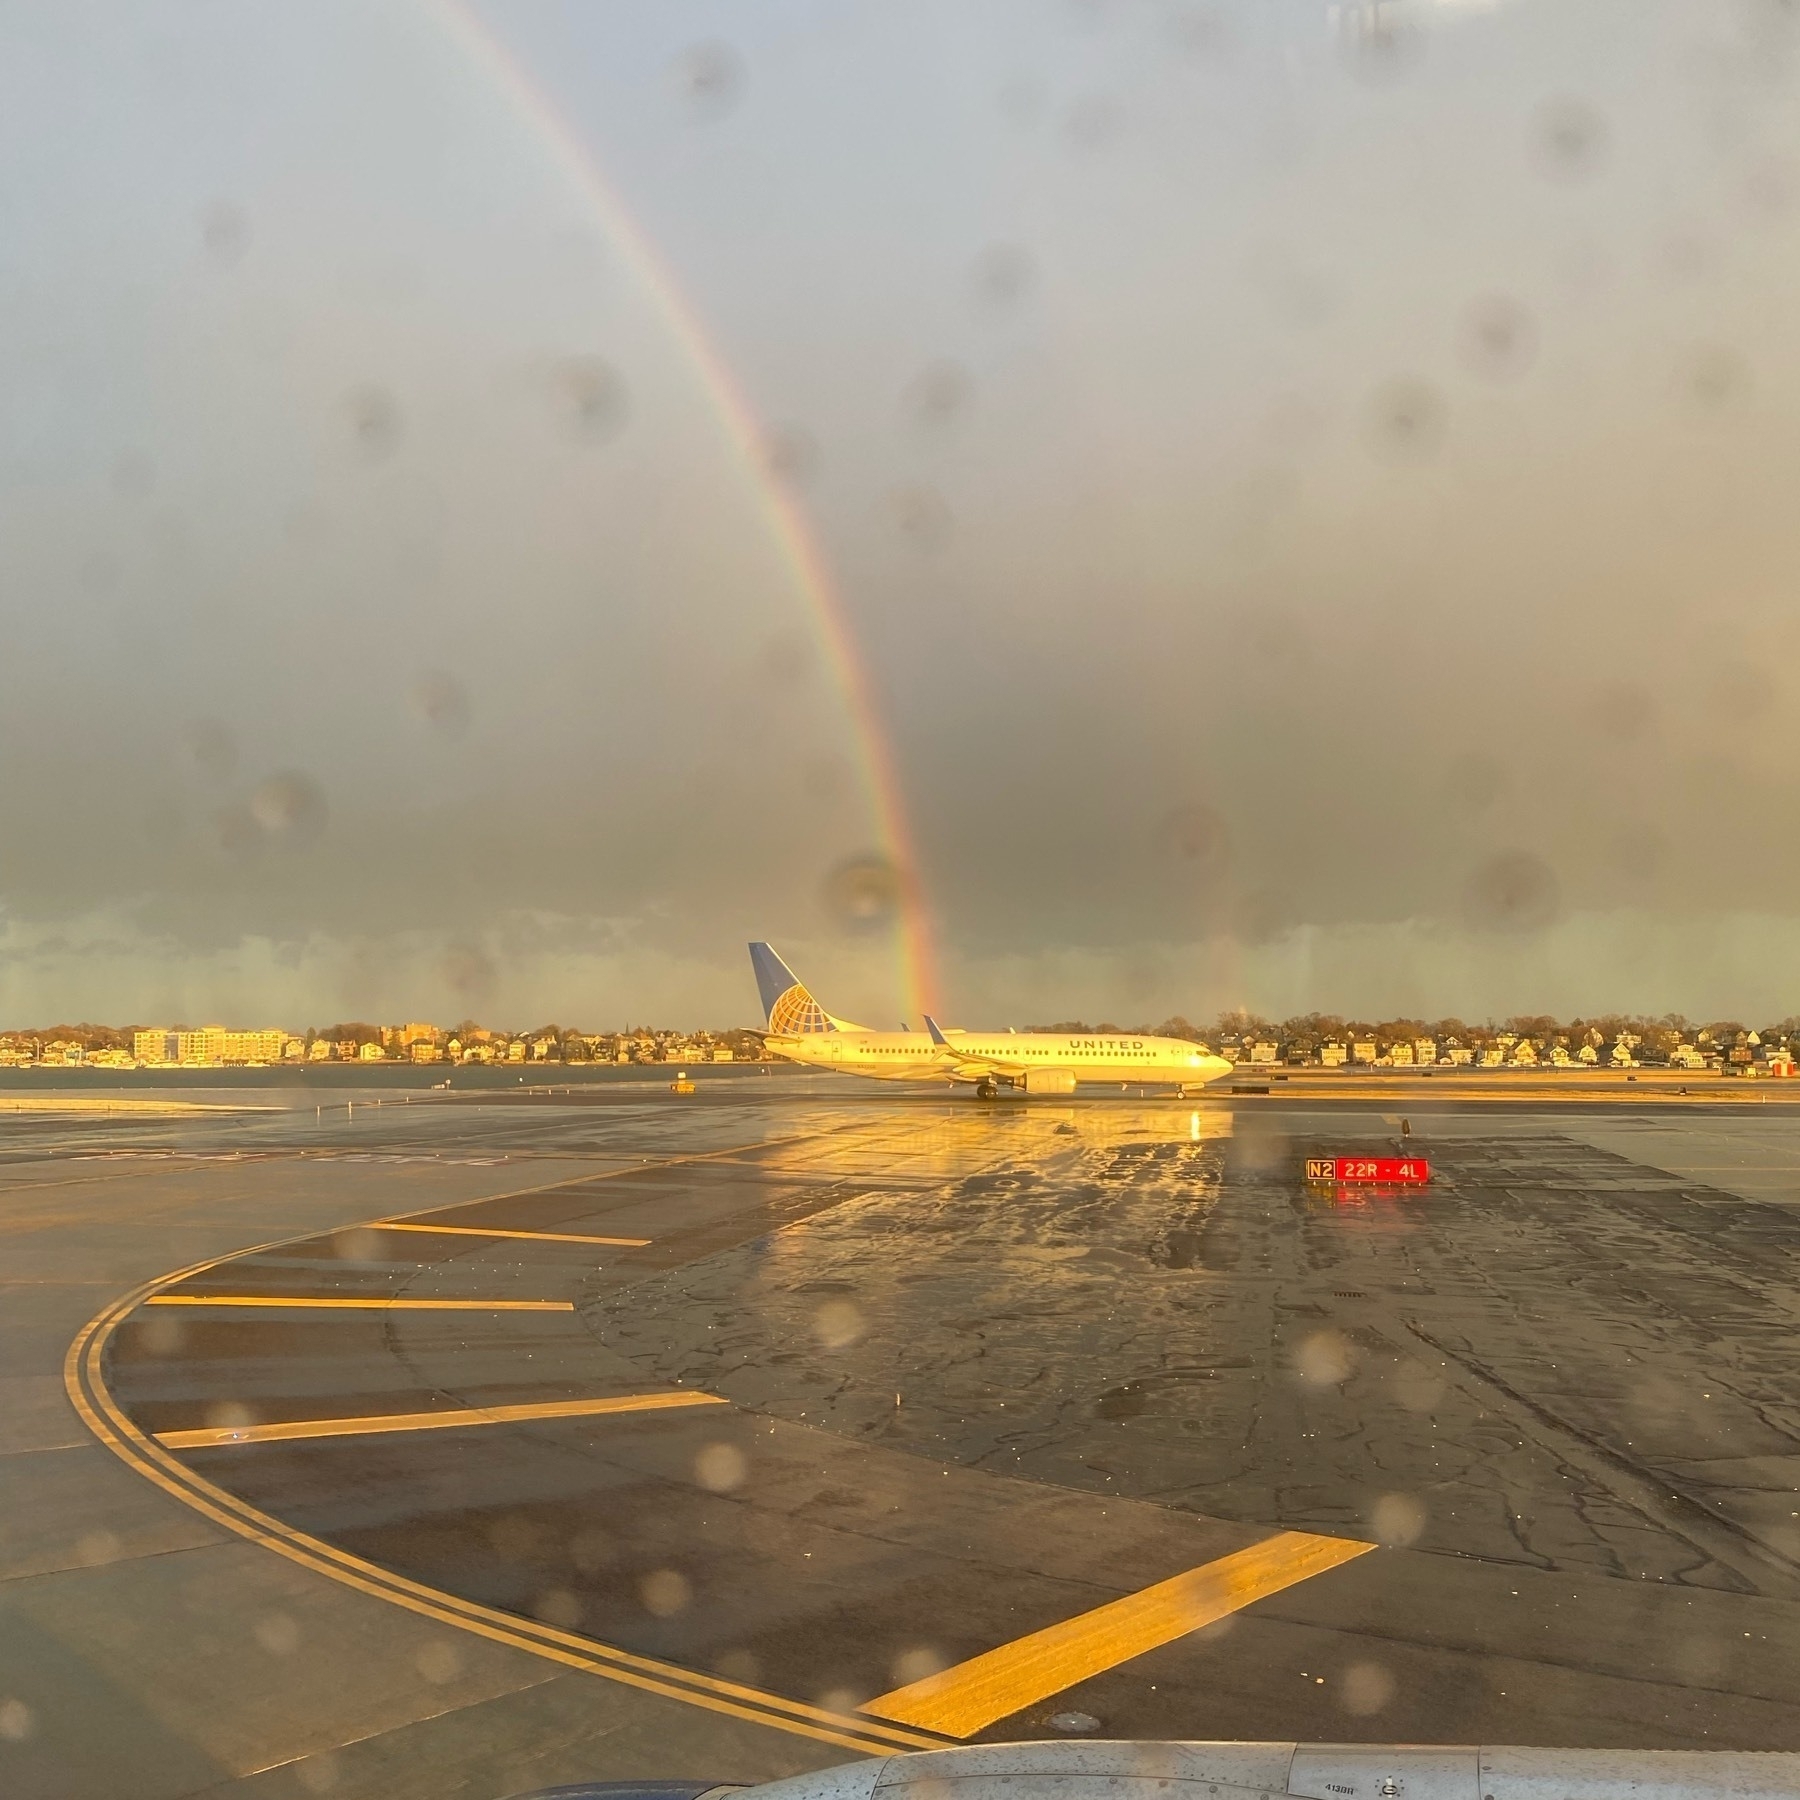 View out an airplane window of another plane on a runway lit by the setting sun with half a rainbow in the sky reaching the ground just behind the other plane.